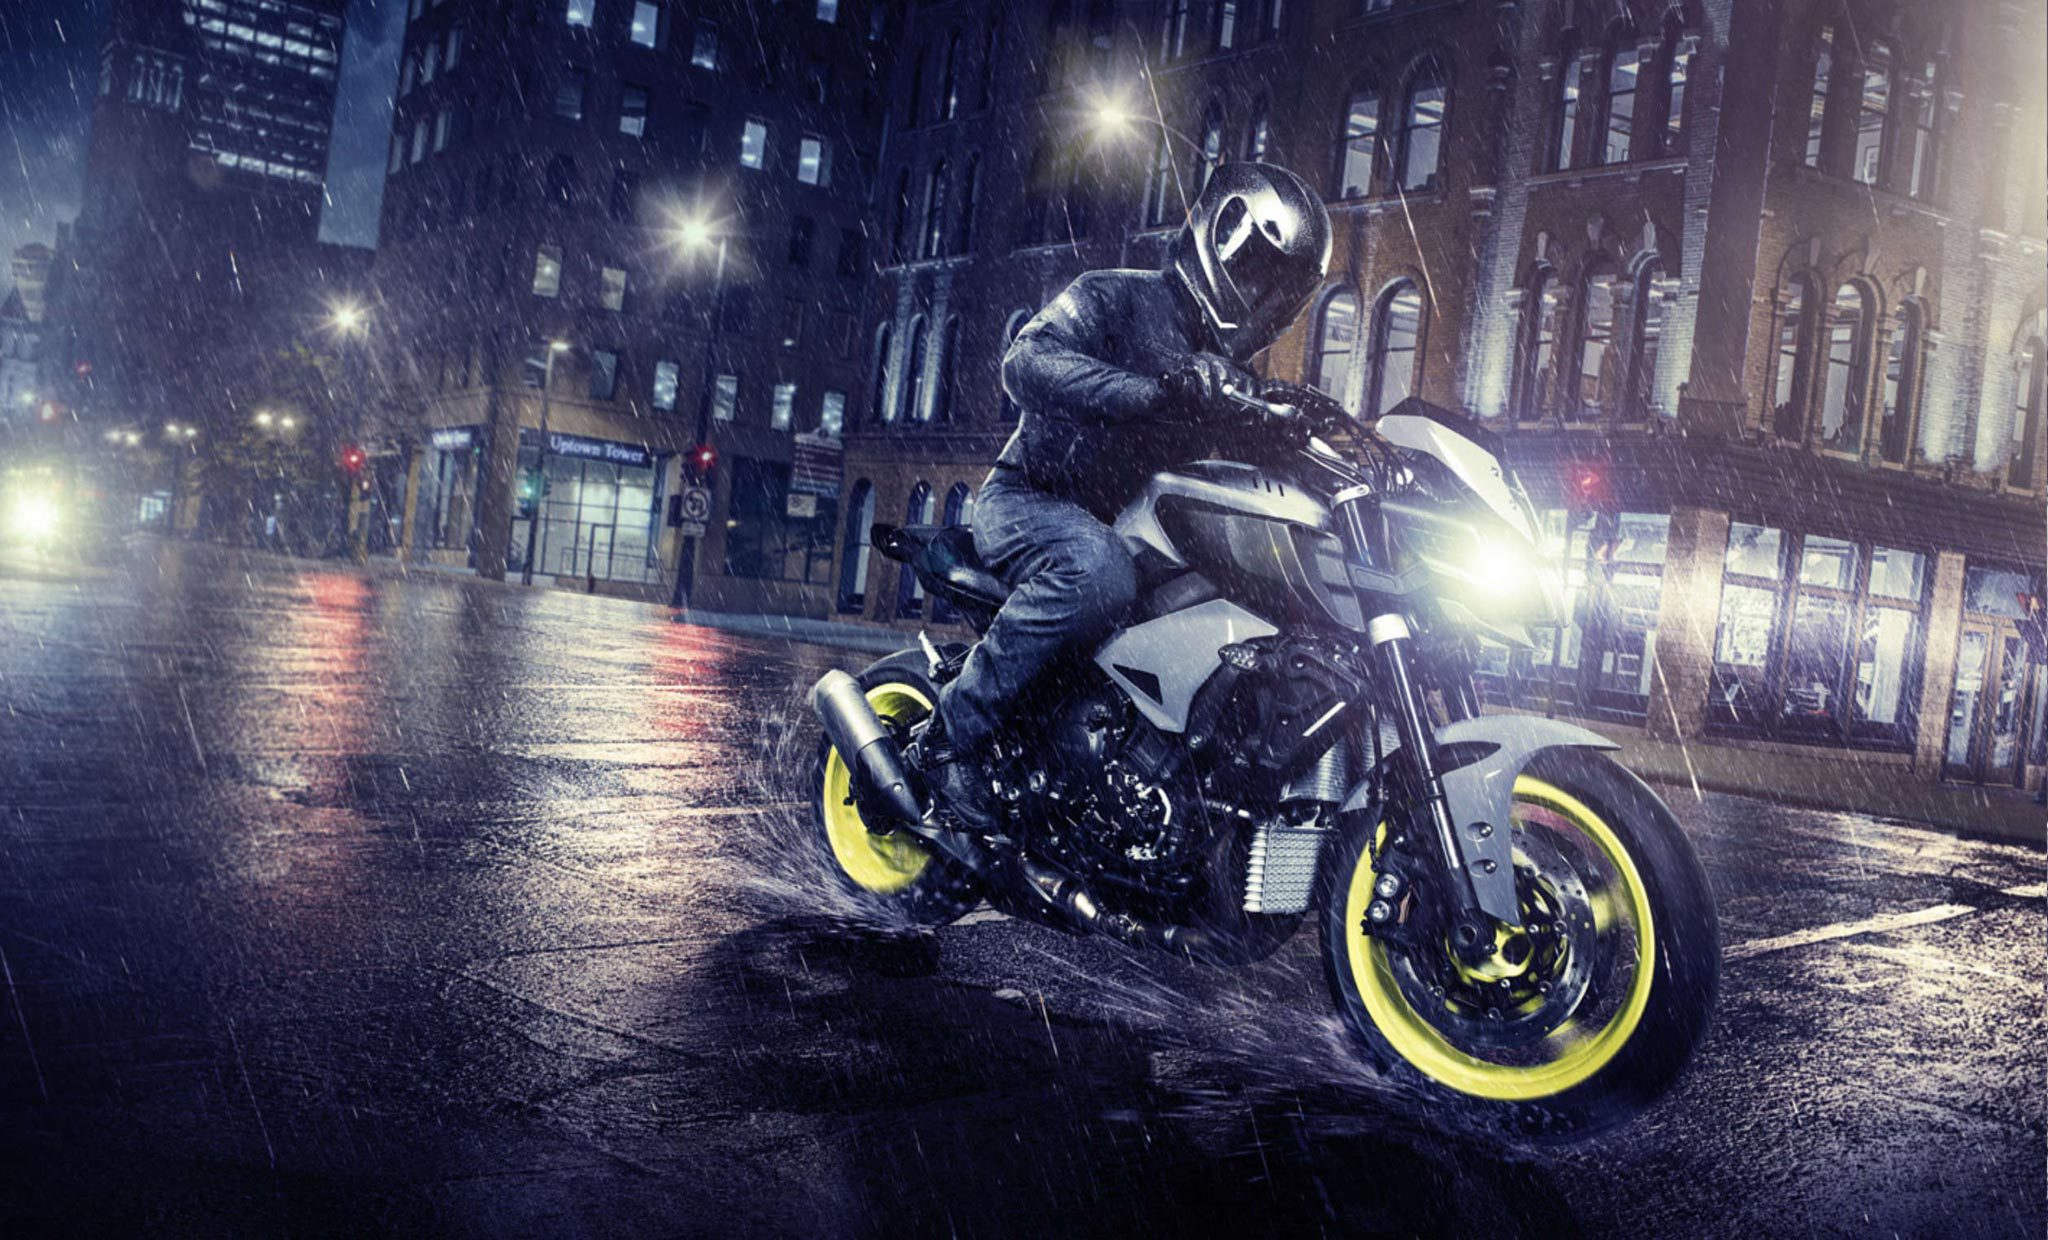 Motorcycle rider through the city in the night rain